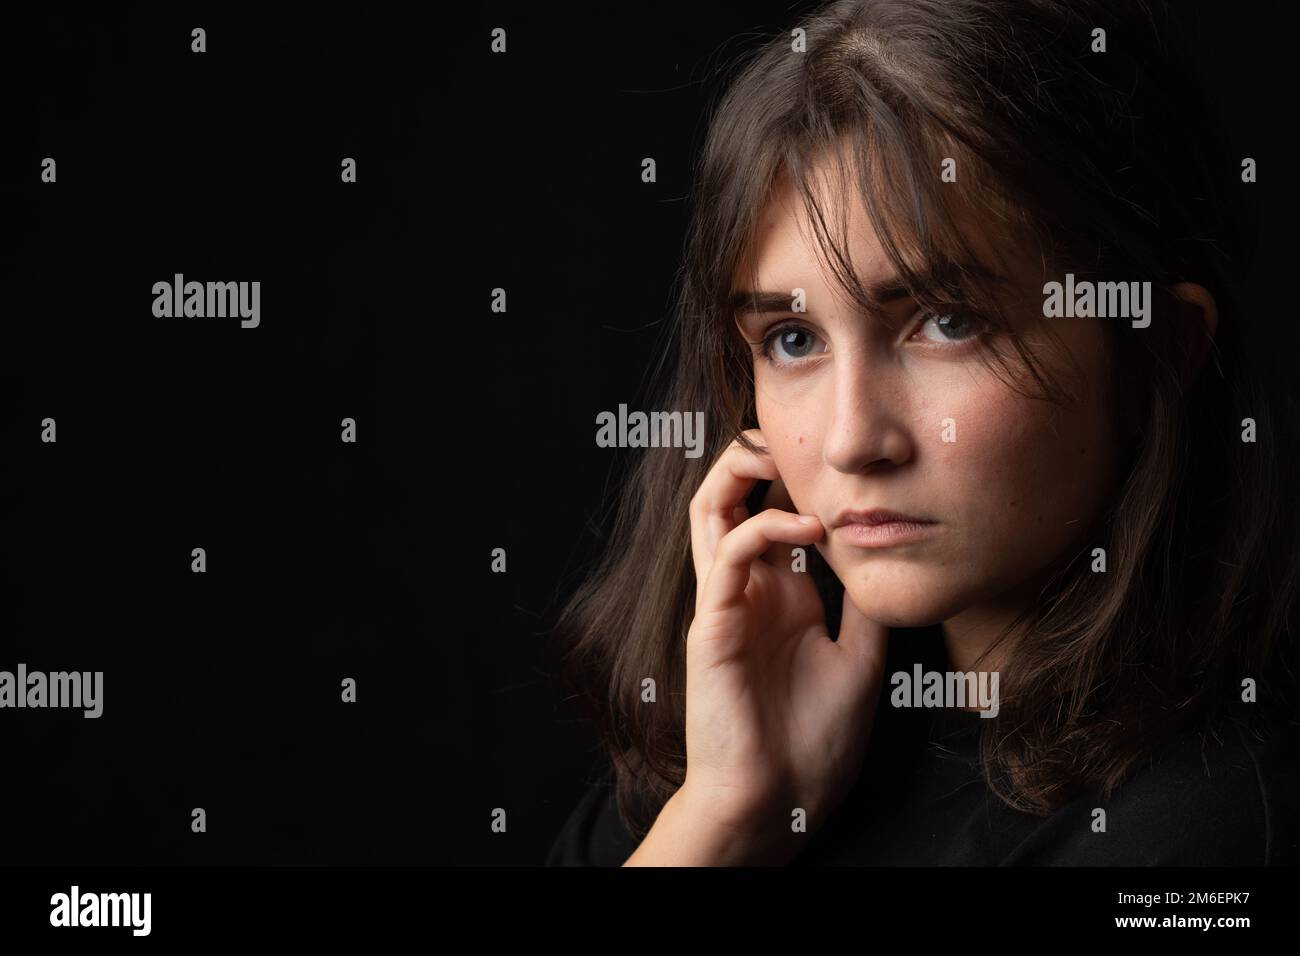 Psychological portrait of a beautiful young girl on a black background Stock Photo